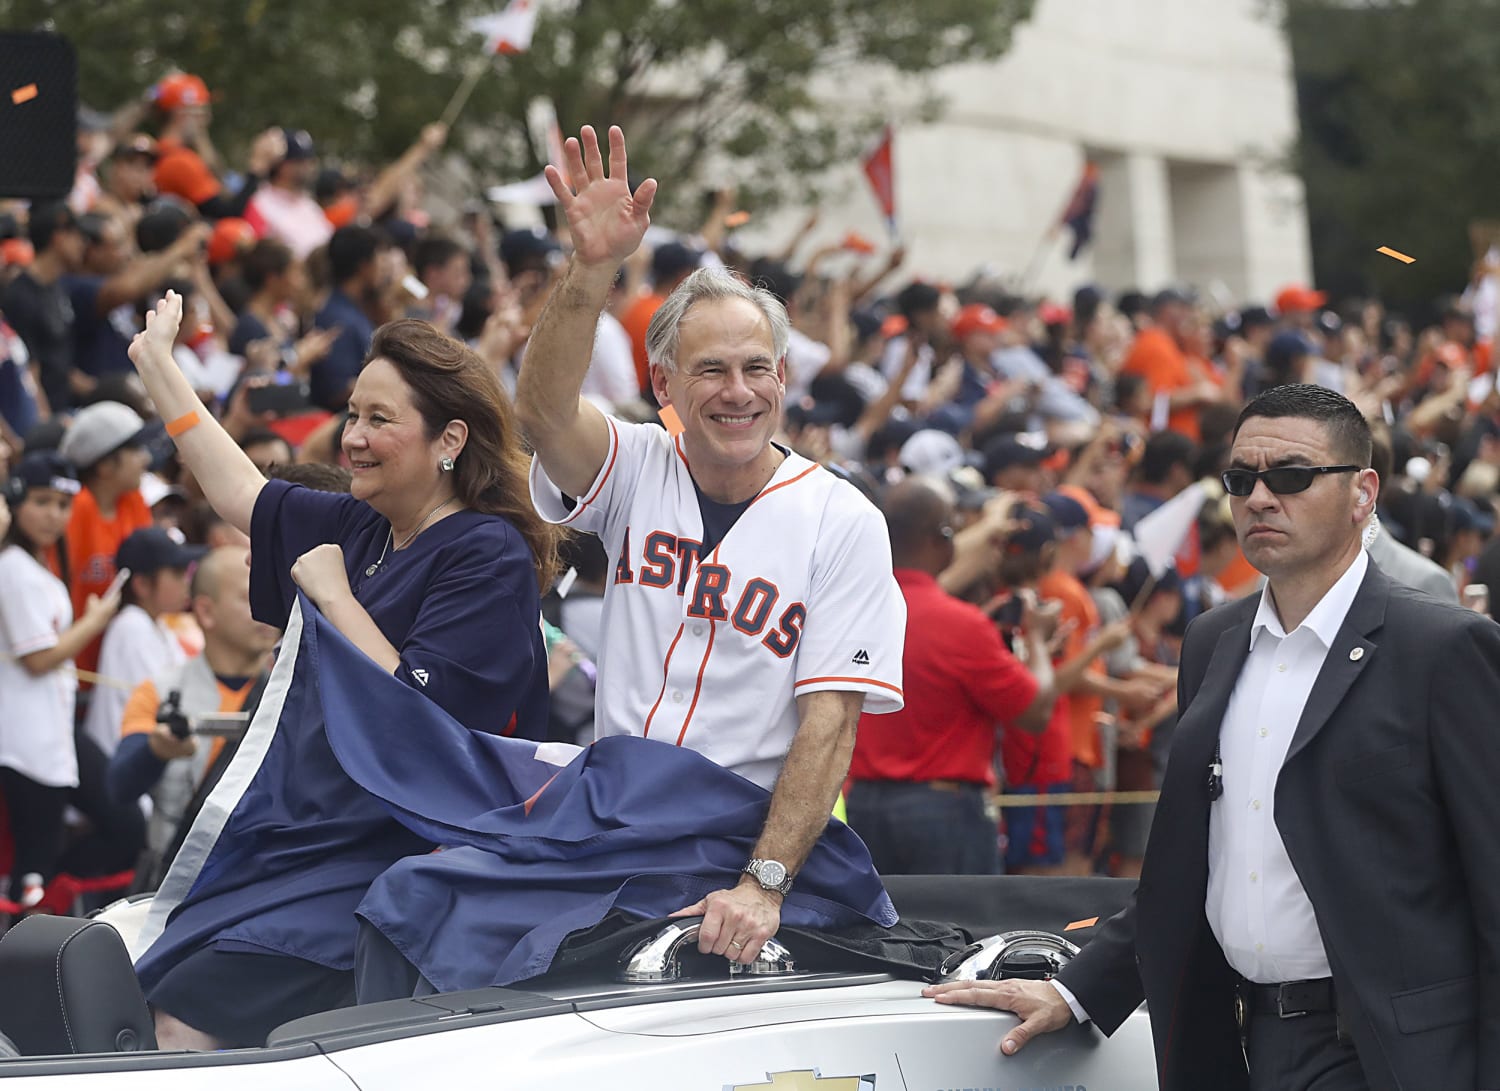 Video Thousands attend victory parade for Houston Astros - ABC News